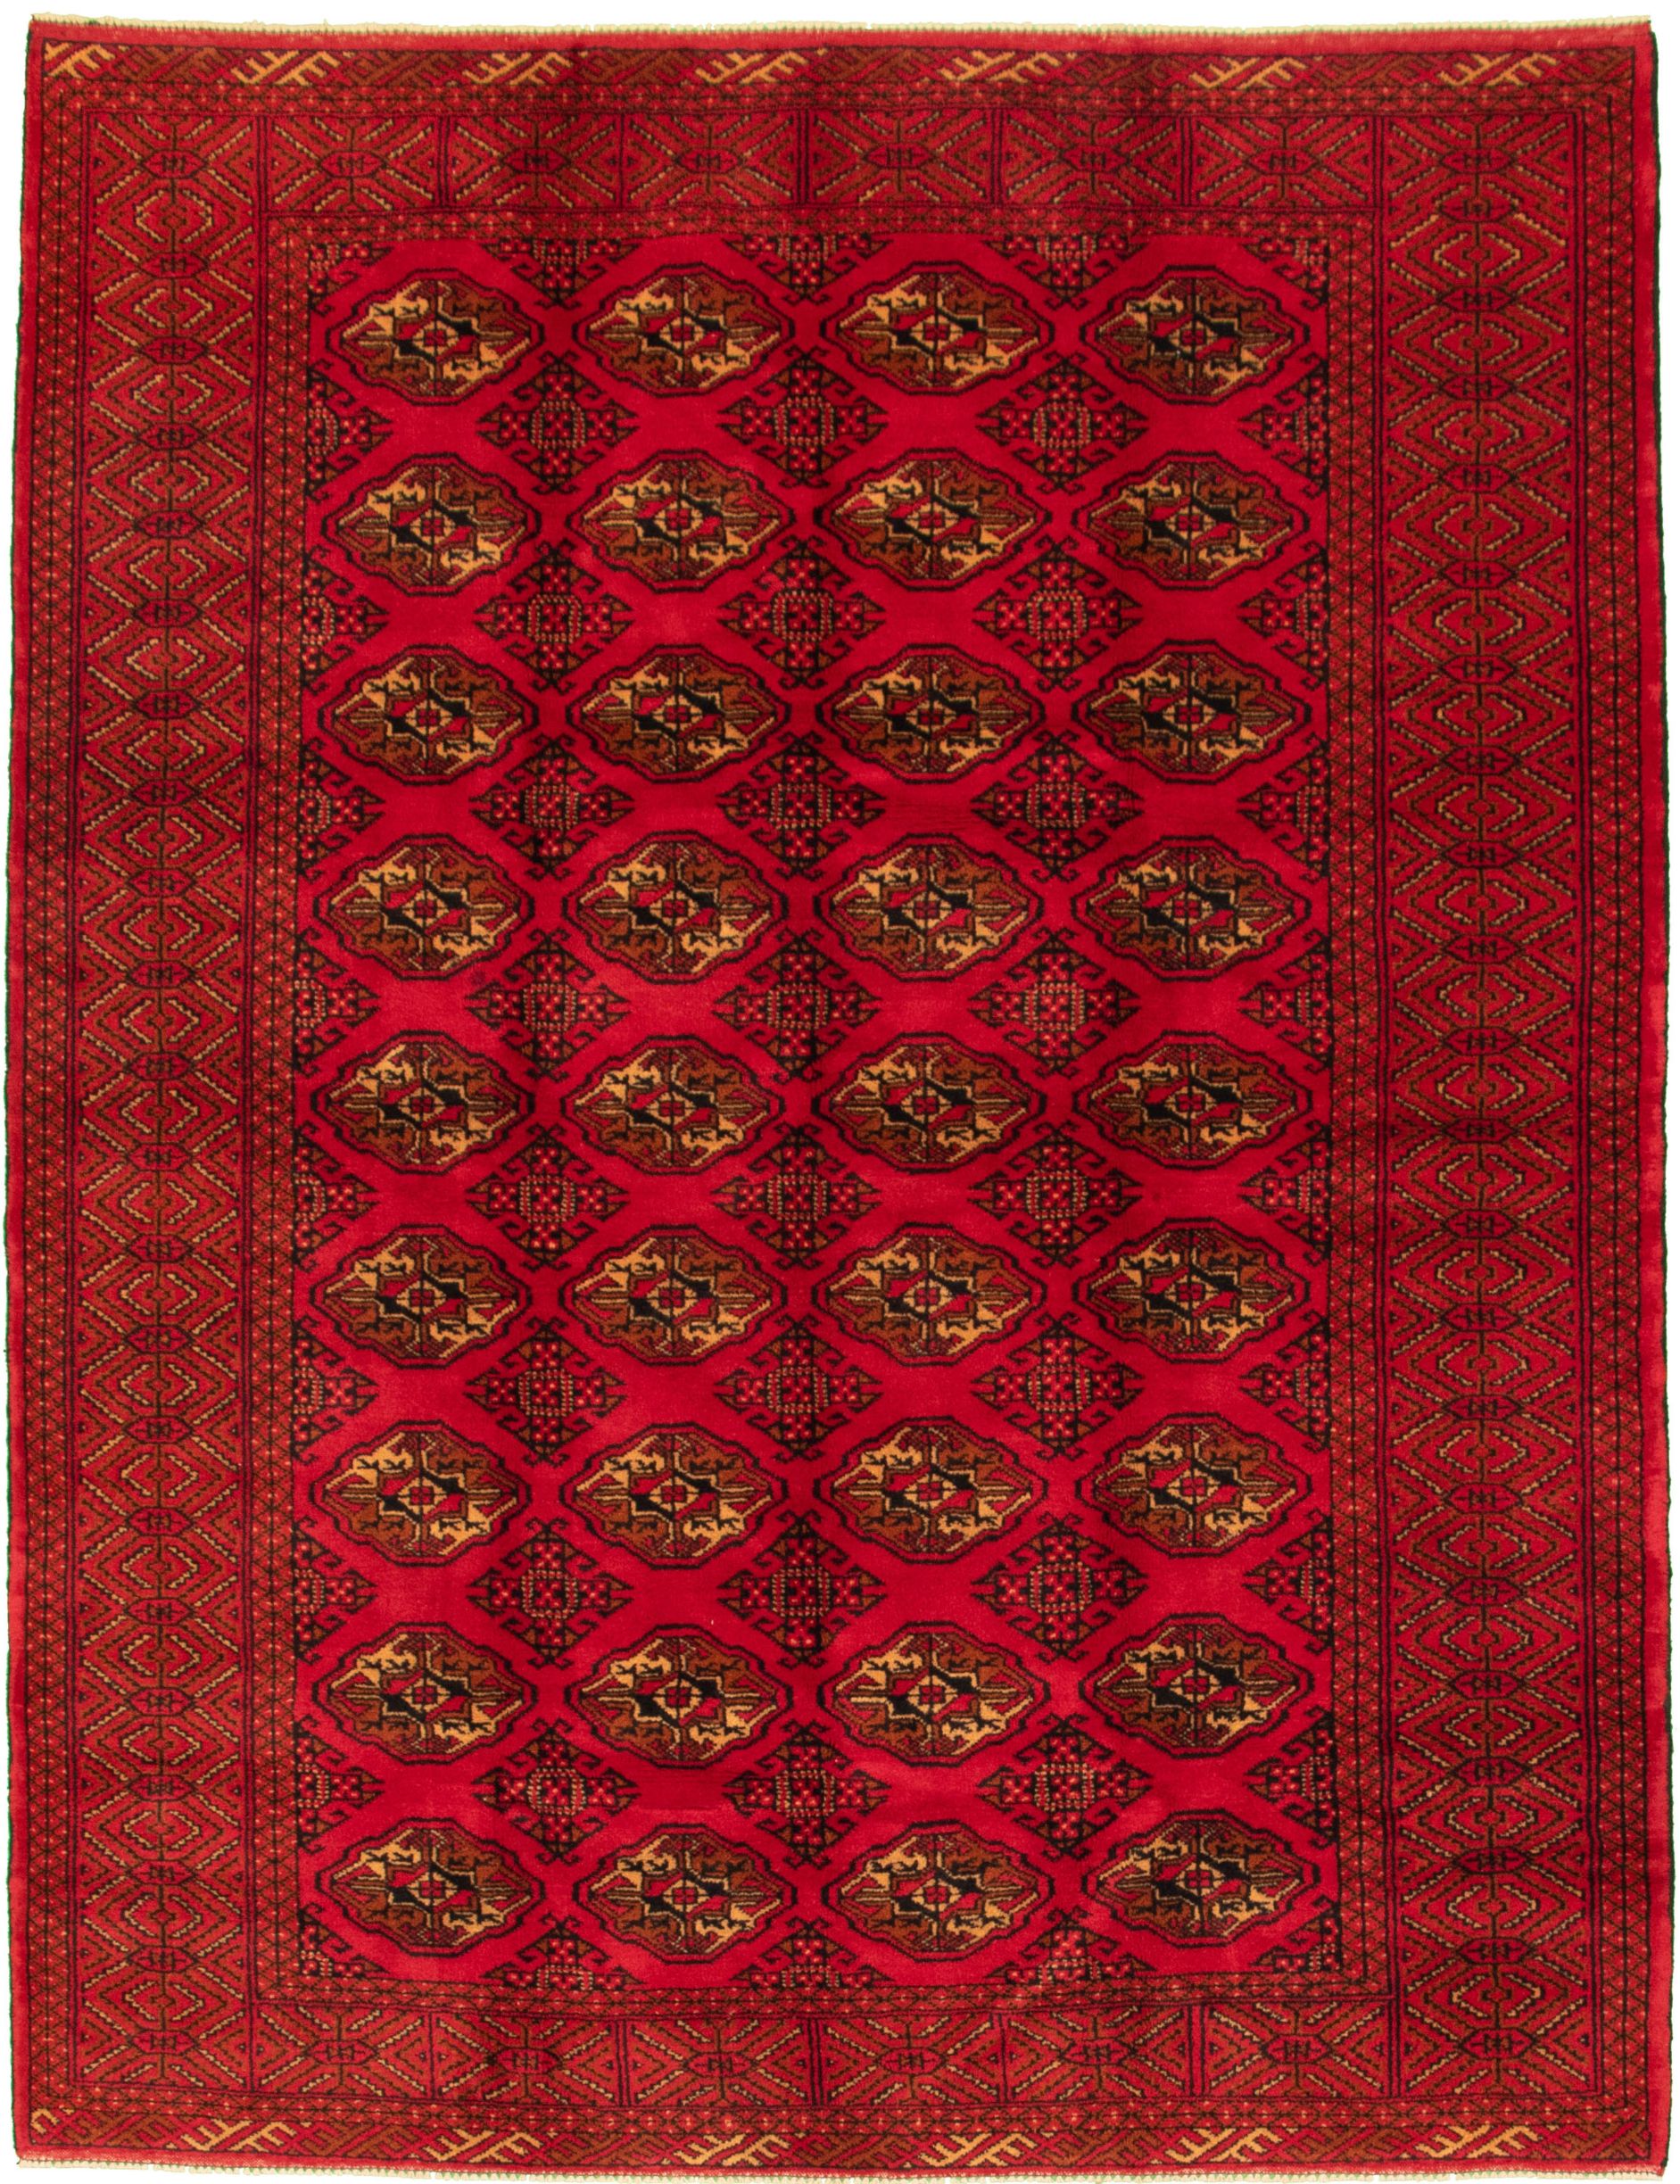 Hand-knotted Khal Mohammadi Red Wool Rug 6'6" x 8'6" Size: 6'6" x 8'6"  